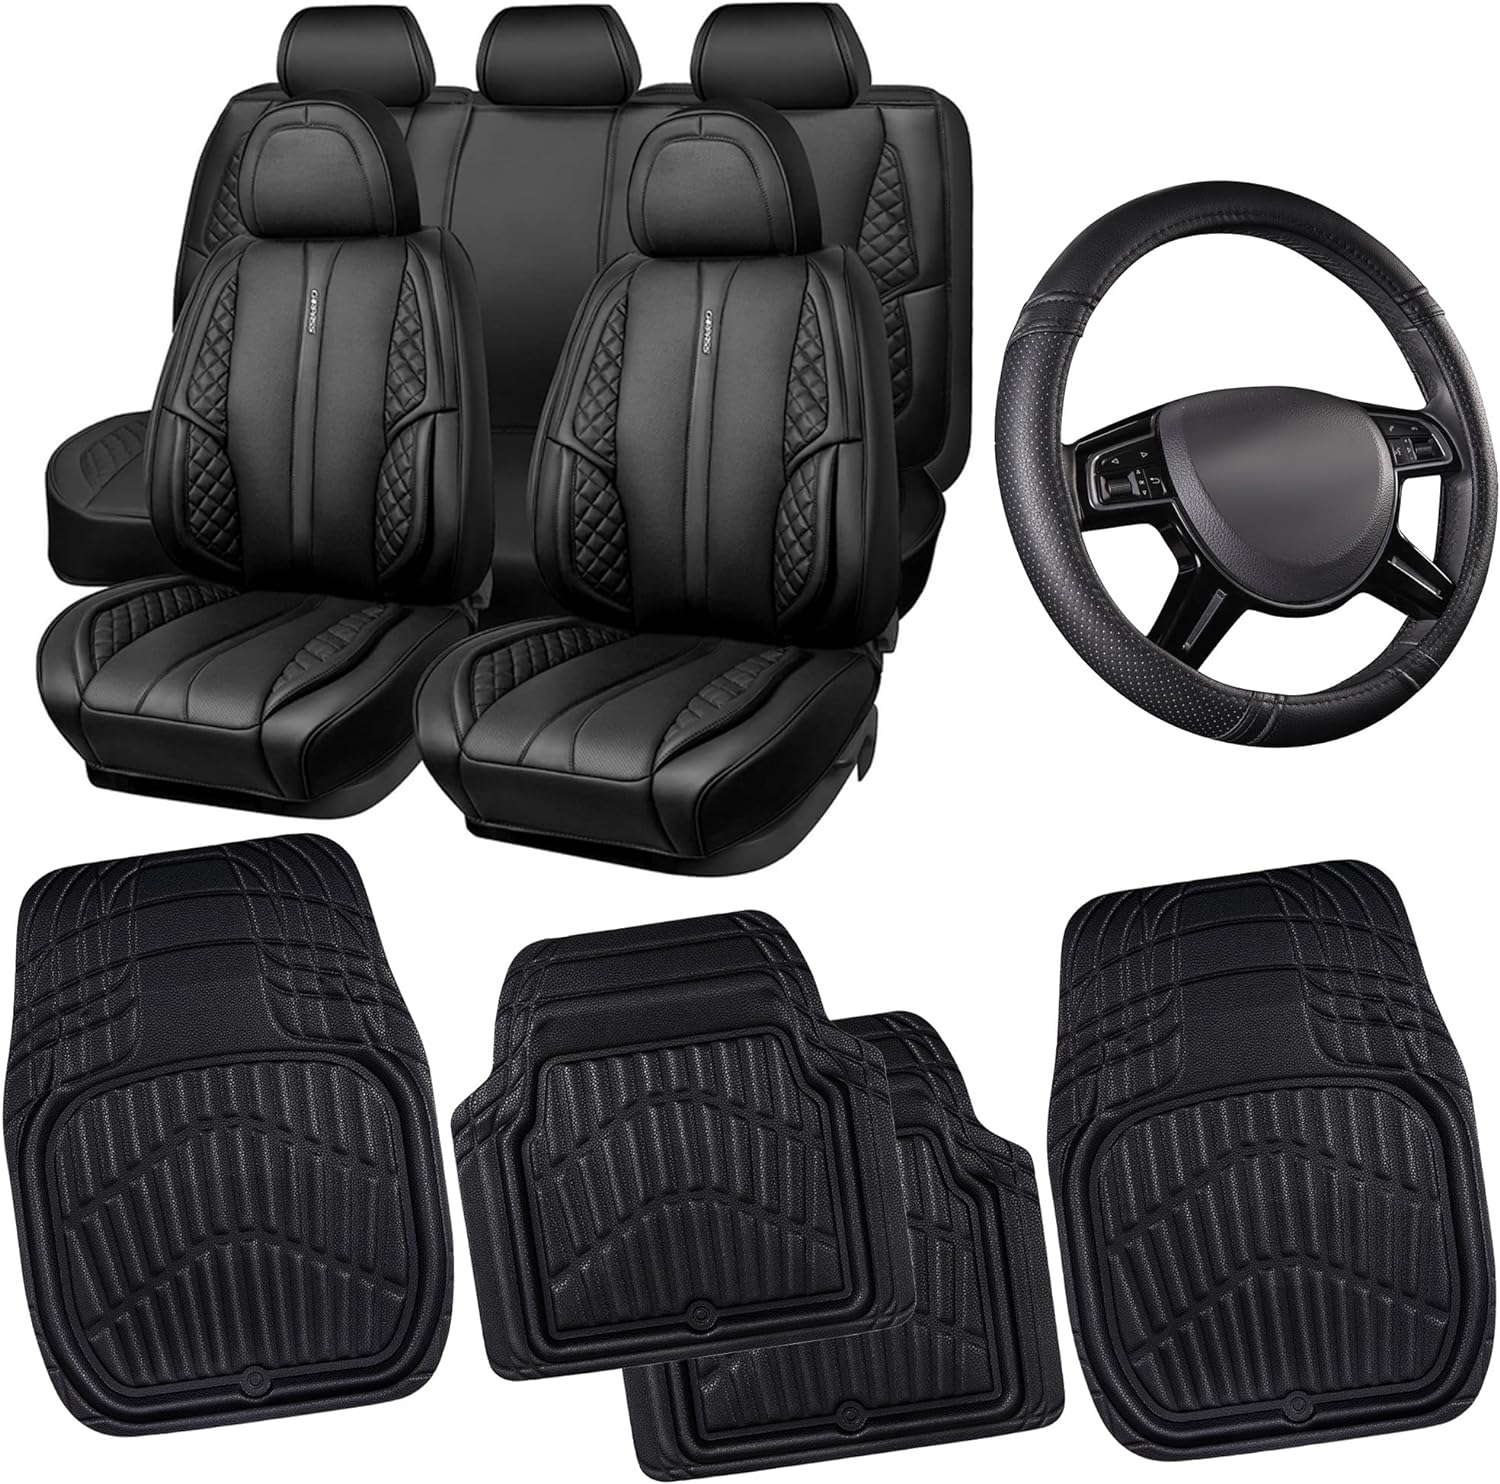 CAR PASS Nappa Leather Car Seat Covers Full Set Bundle with Black Floor mats and Steering Wheel Cover